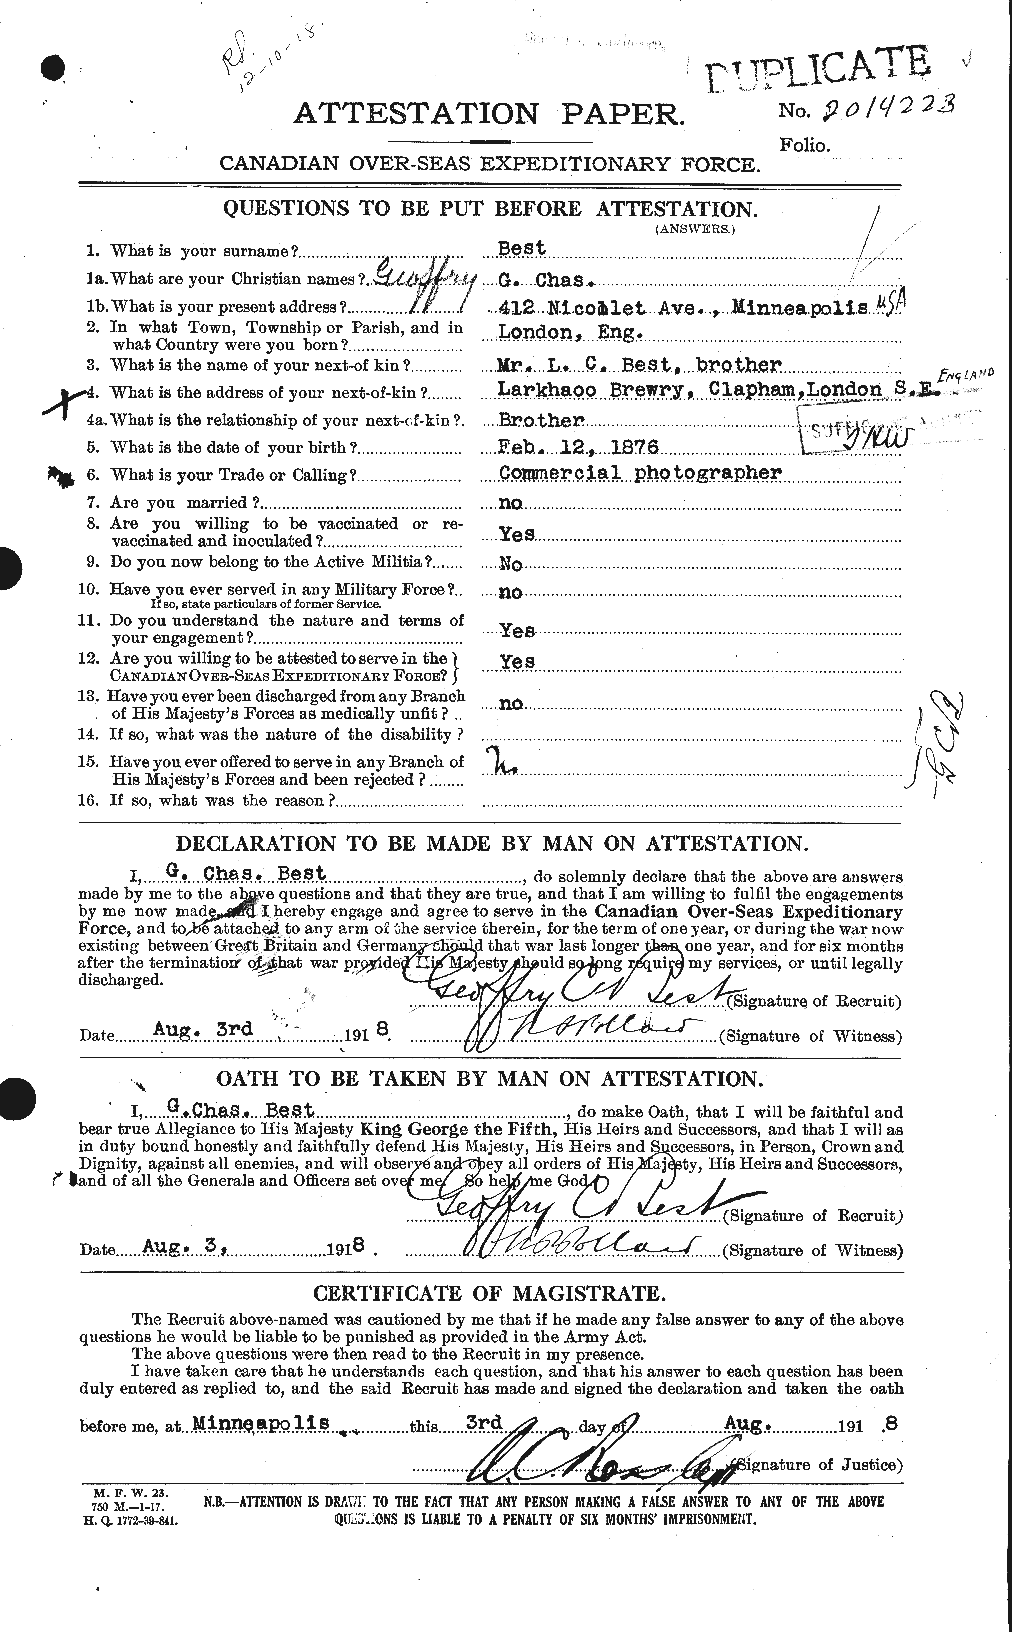 Personnel Records of the First World War - CEF 240256a